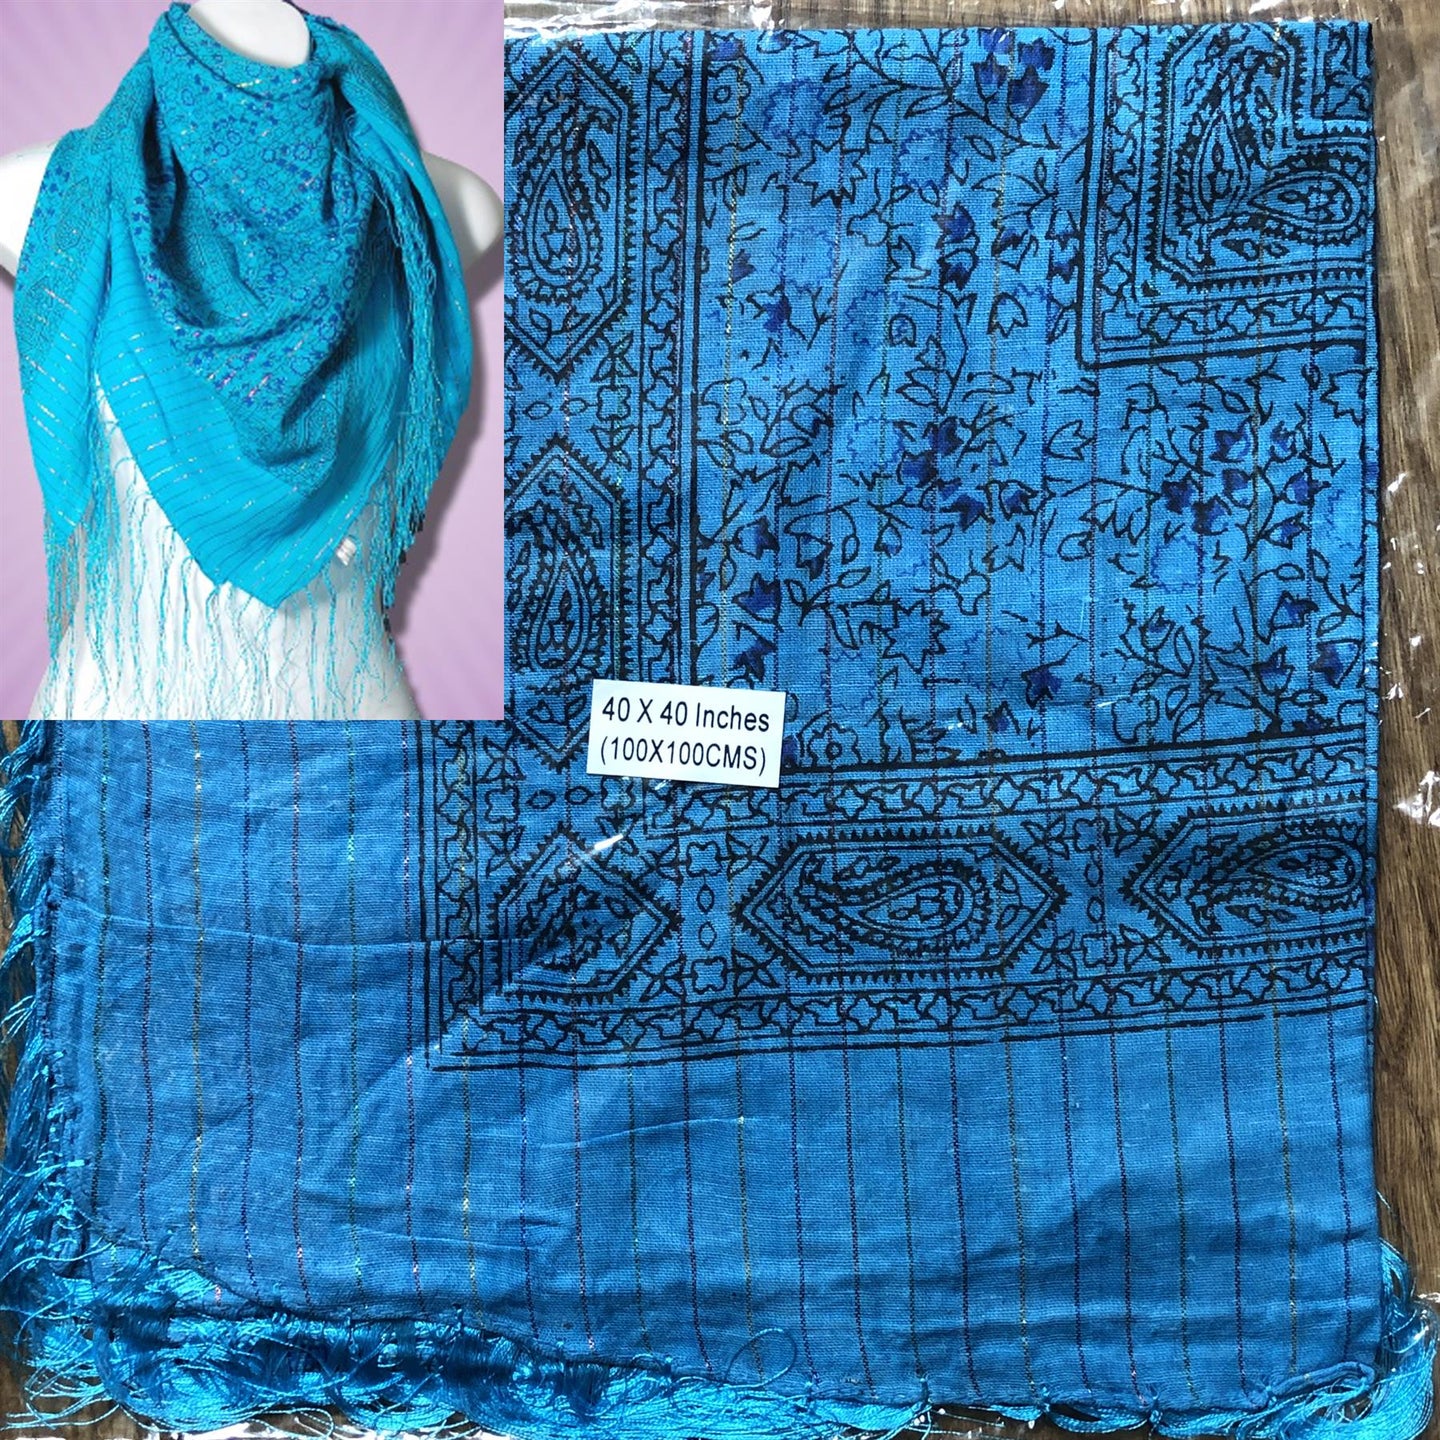 Cotton Dollar Print Scarf Shawl with Lurex and Fringe – Turquoise